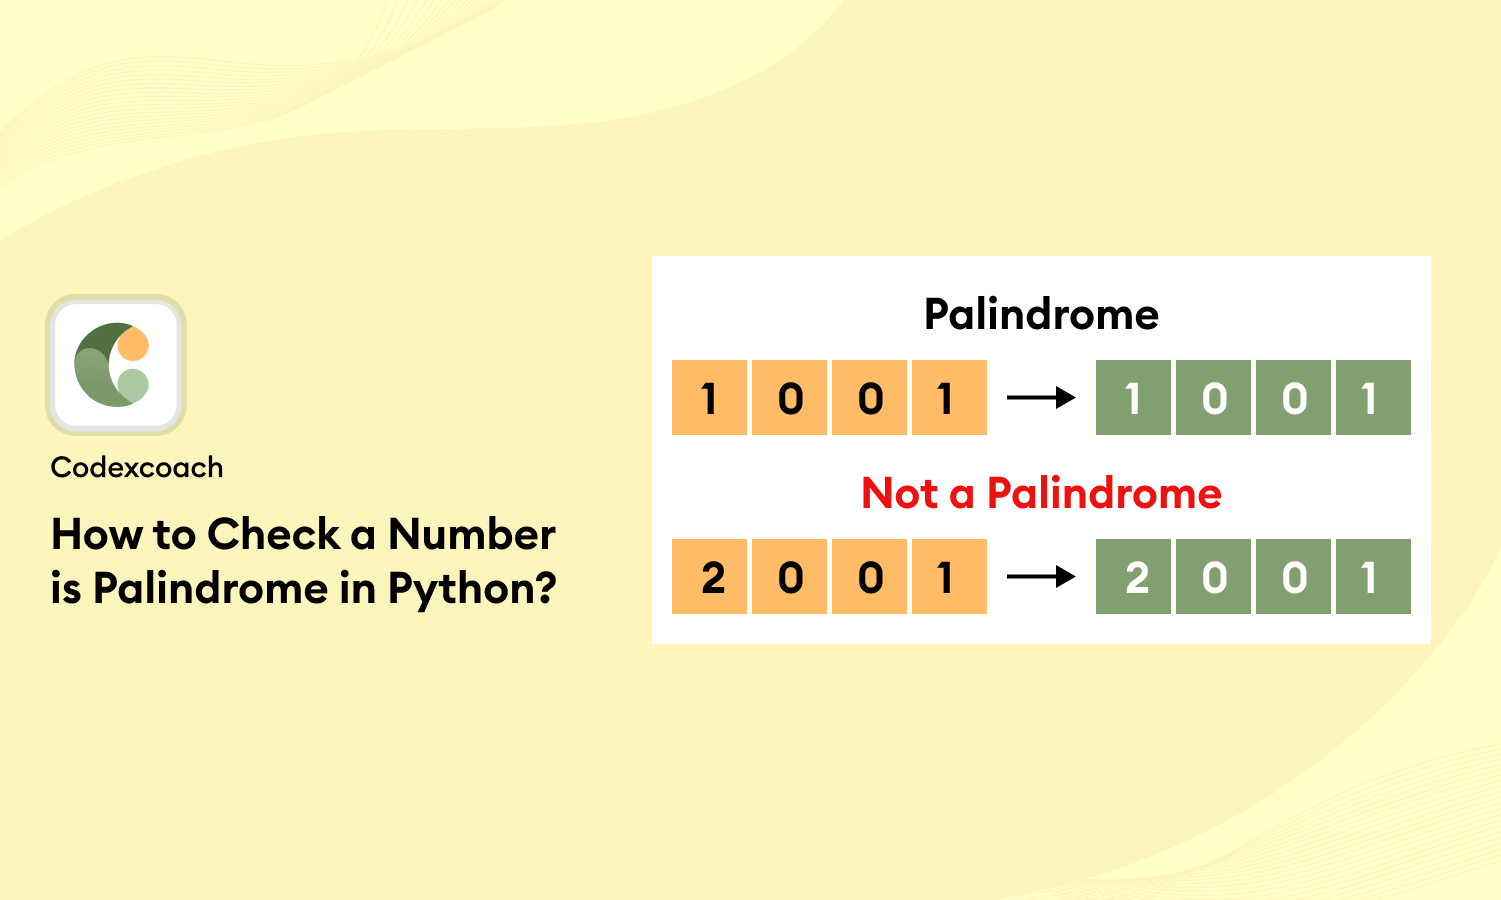 How to Check a Number is Palindrome in Python?